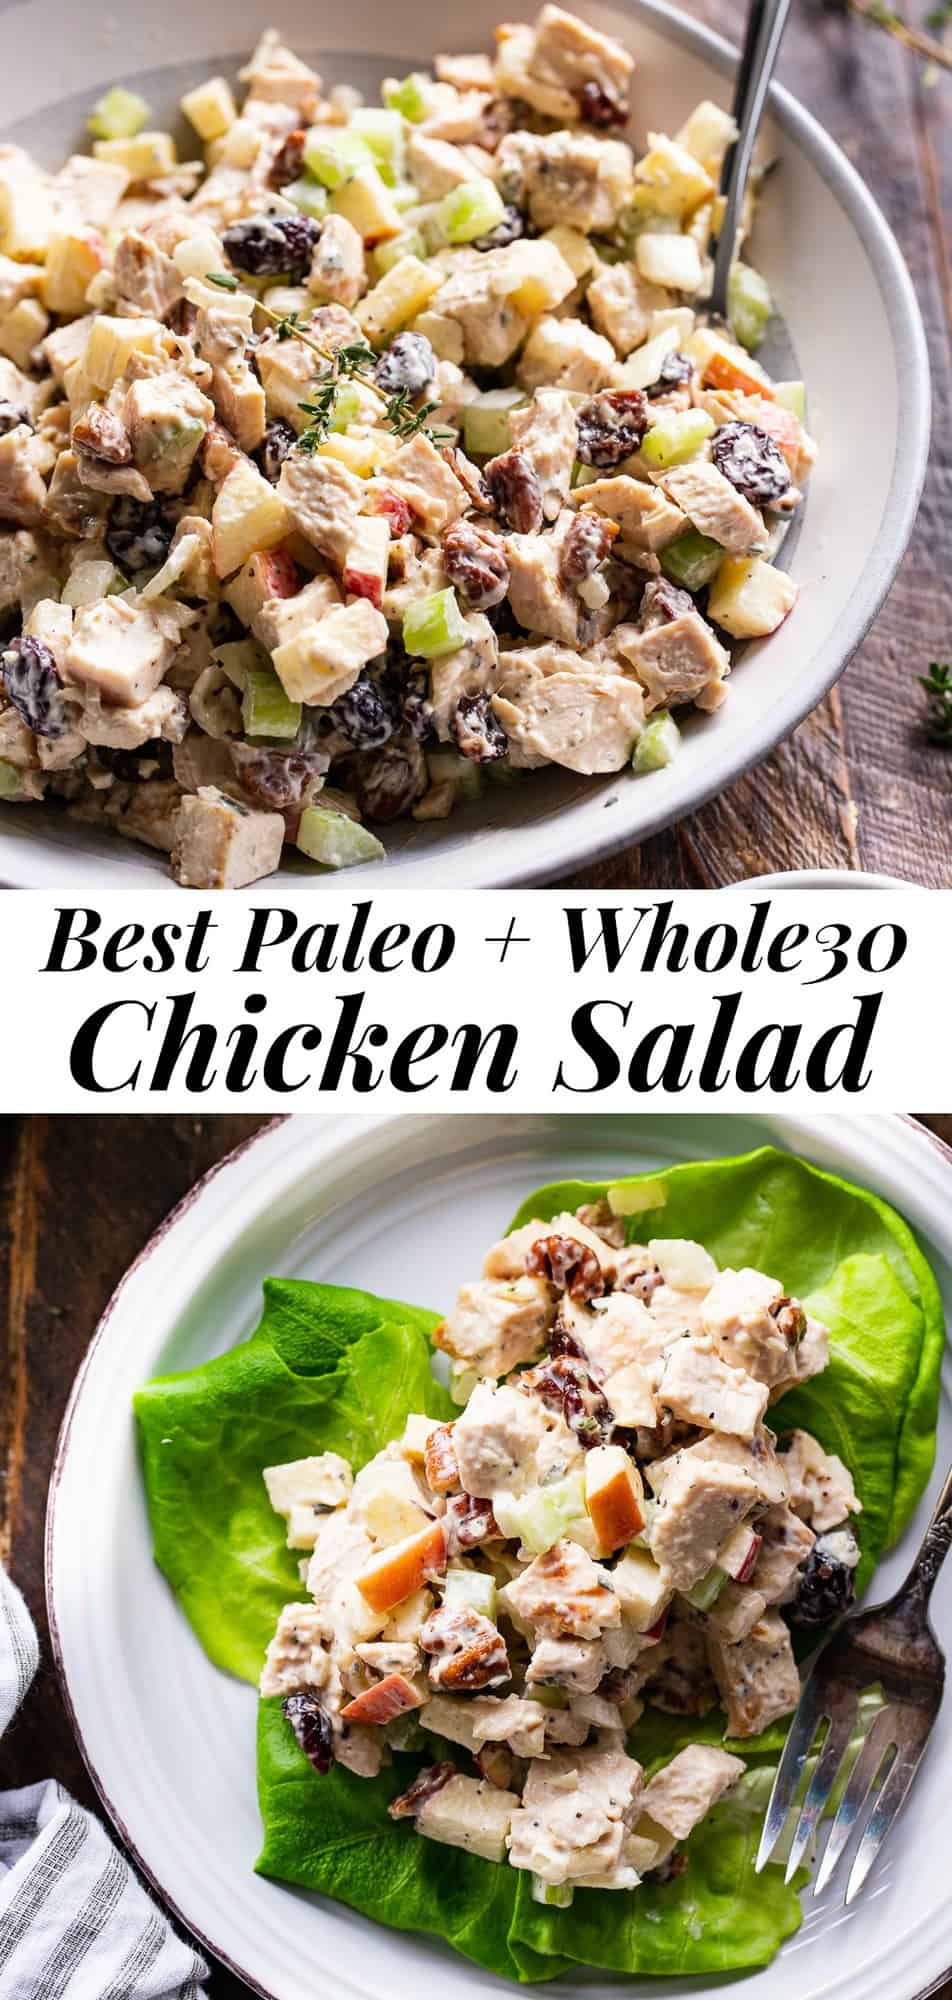 This healthy paleo chicken salad is packed with so many goodies like crunchy apples and celery, onions, cranberries, fresh herbs and tossed with an easy homemade mayo.  It's perfect over a salad, wrapped in greens or on its own for lunch or a snack!  Family approved, sugar free, dairy free and Whole30 compliant. #paleo #whole30 #cleaneating #chickensalad